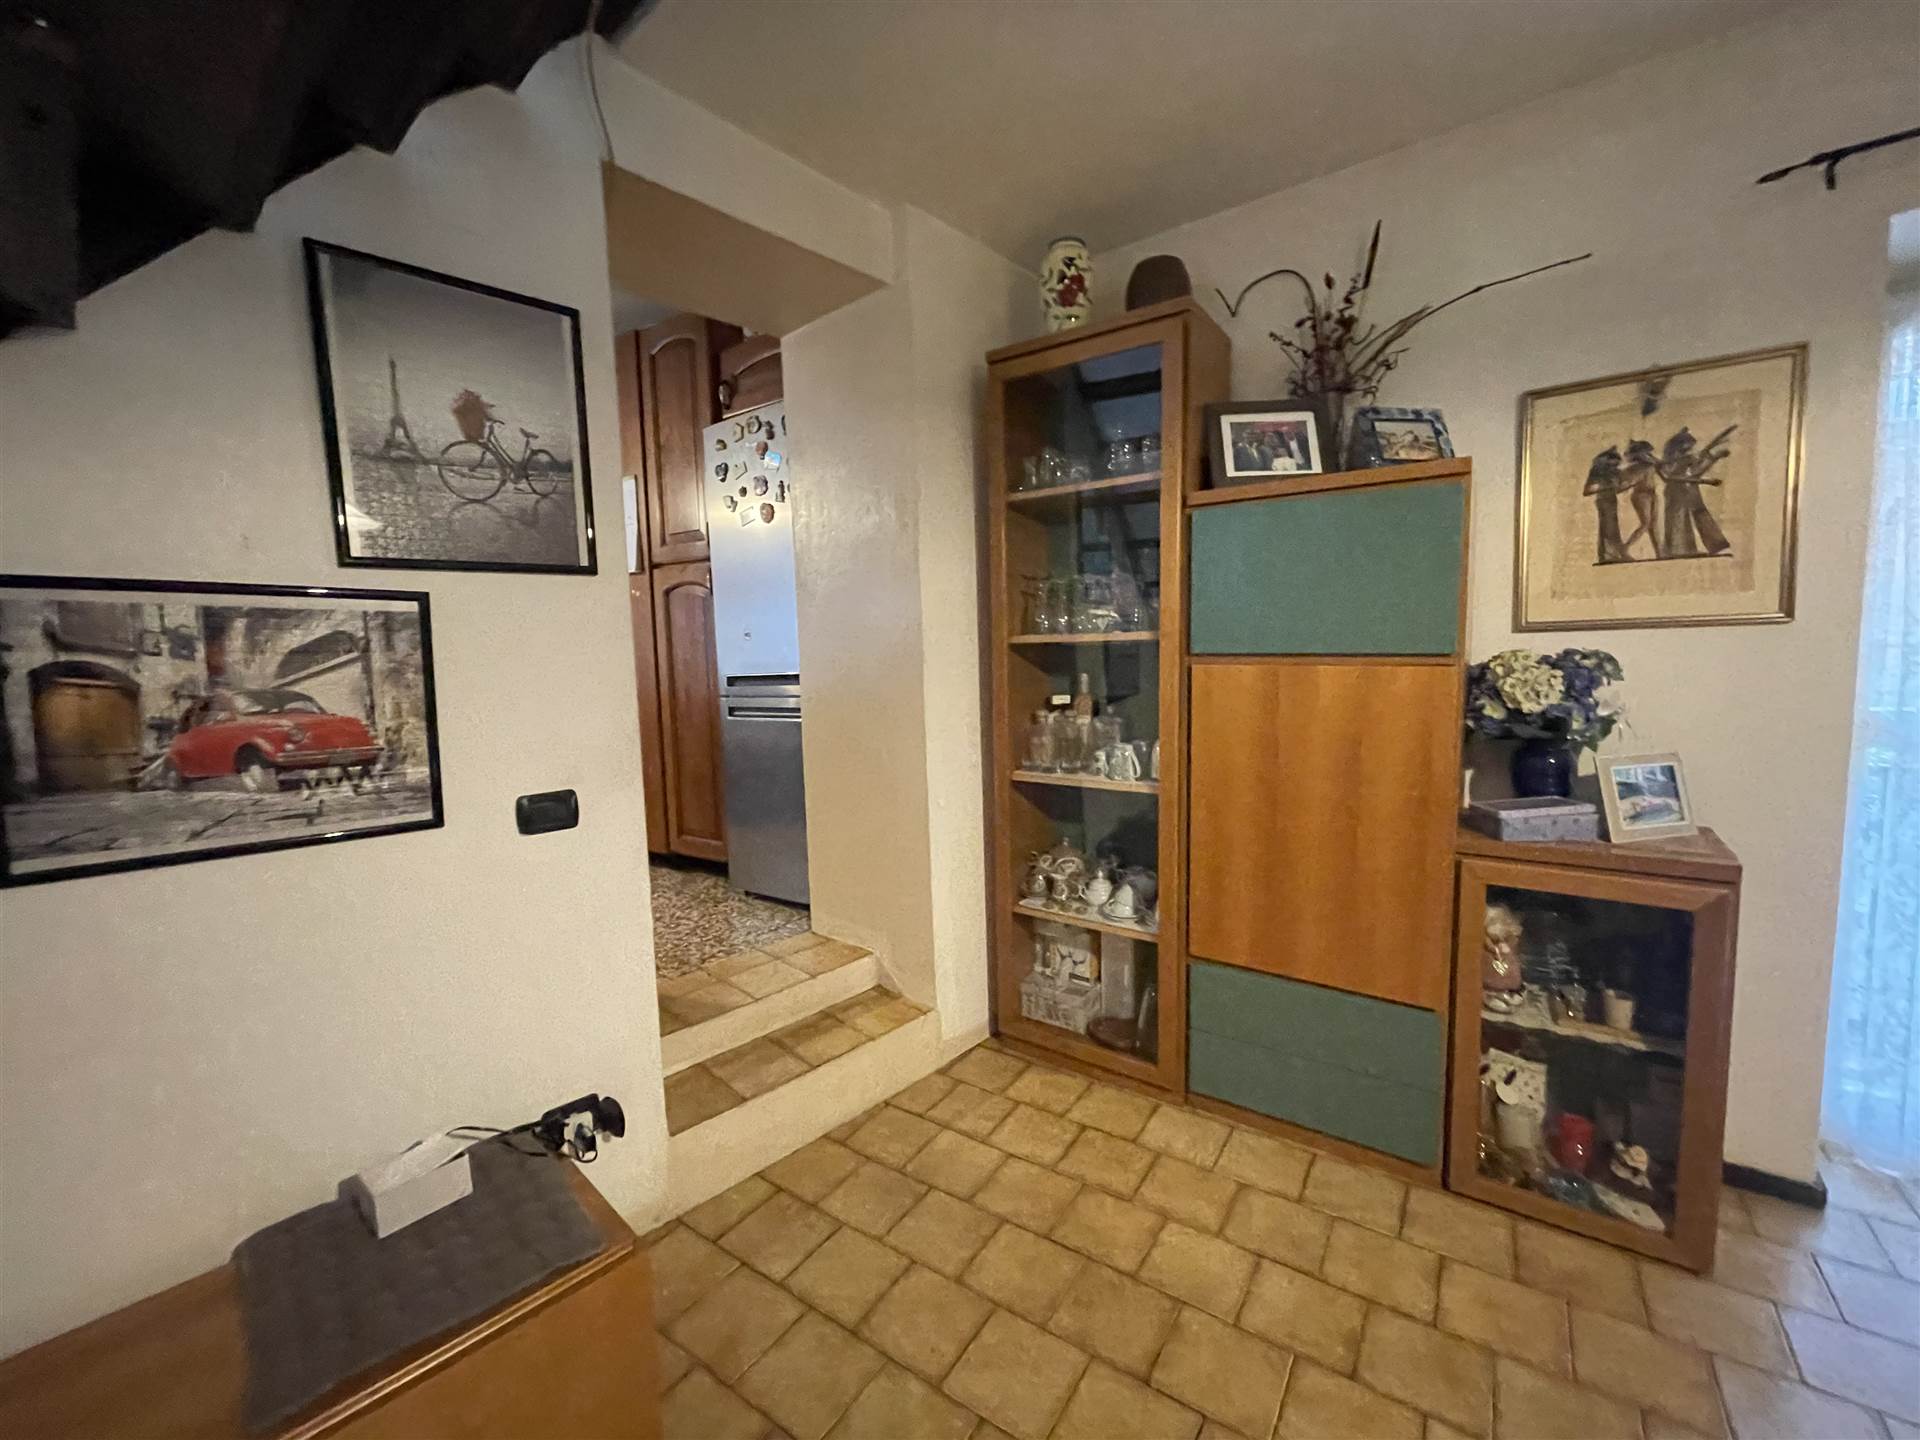 URGNANO, Apartment for sale of 92 Sq. mt., Good condition, Heating Individual heating system, Energetic class: G, placed at 1° on 2, composed by: 3 